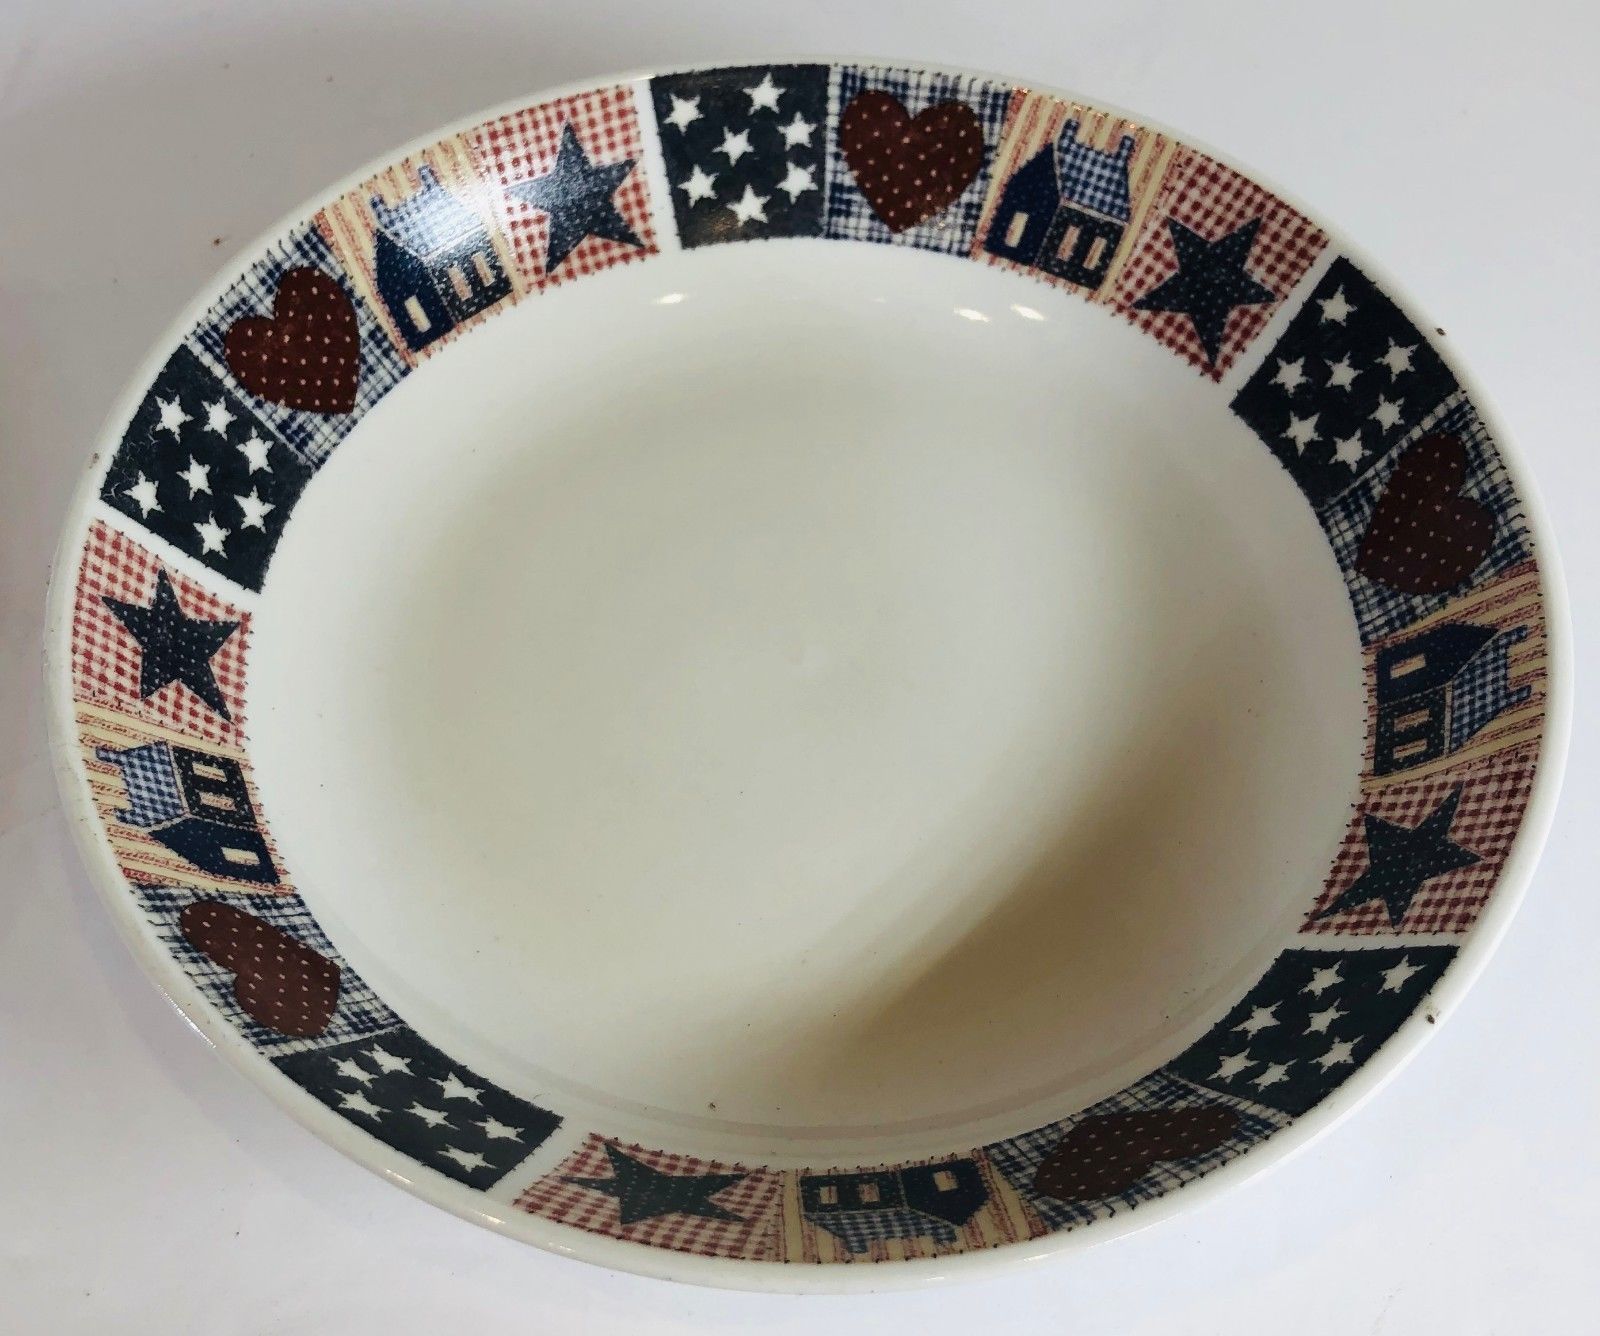 Majesticware by Oneida "American Quilt" Dinnerware Collection - $5.93 - $53.46